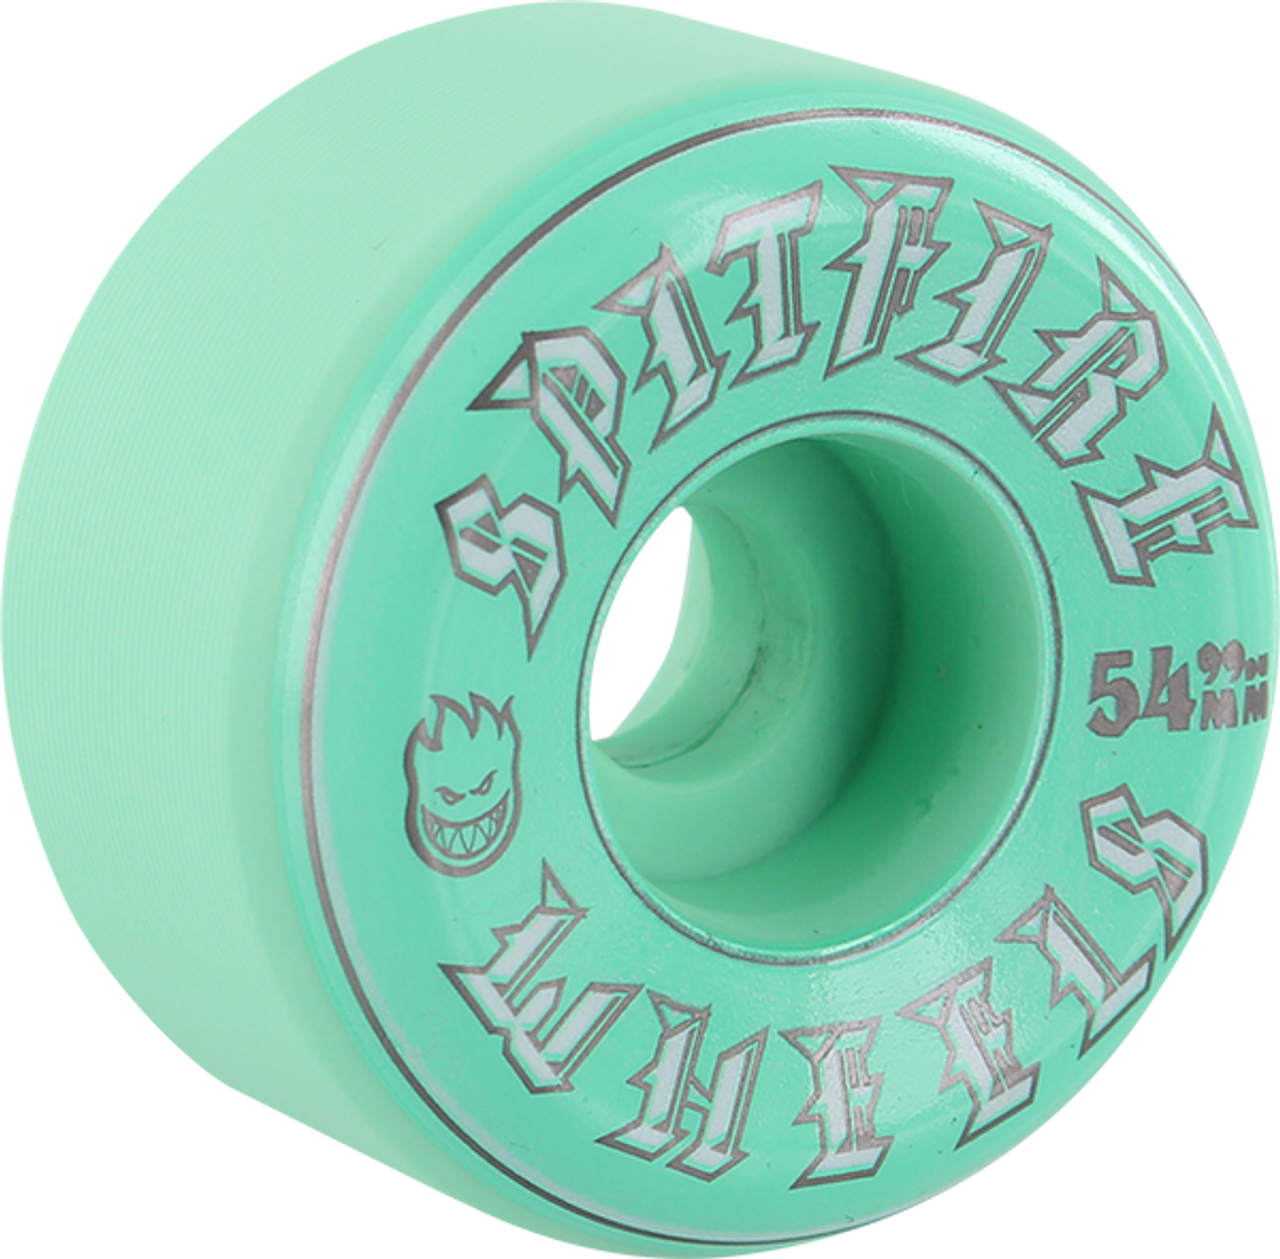 SPITFIRE OLD ENGLISH 54mm 99a TURQUOISE WHEELS SET